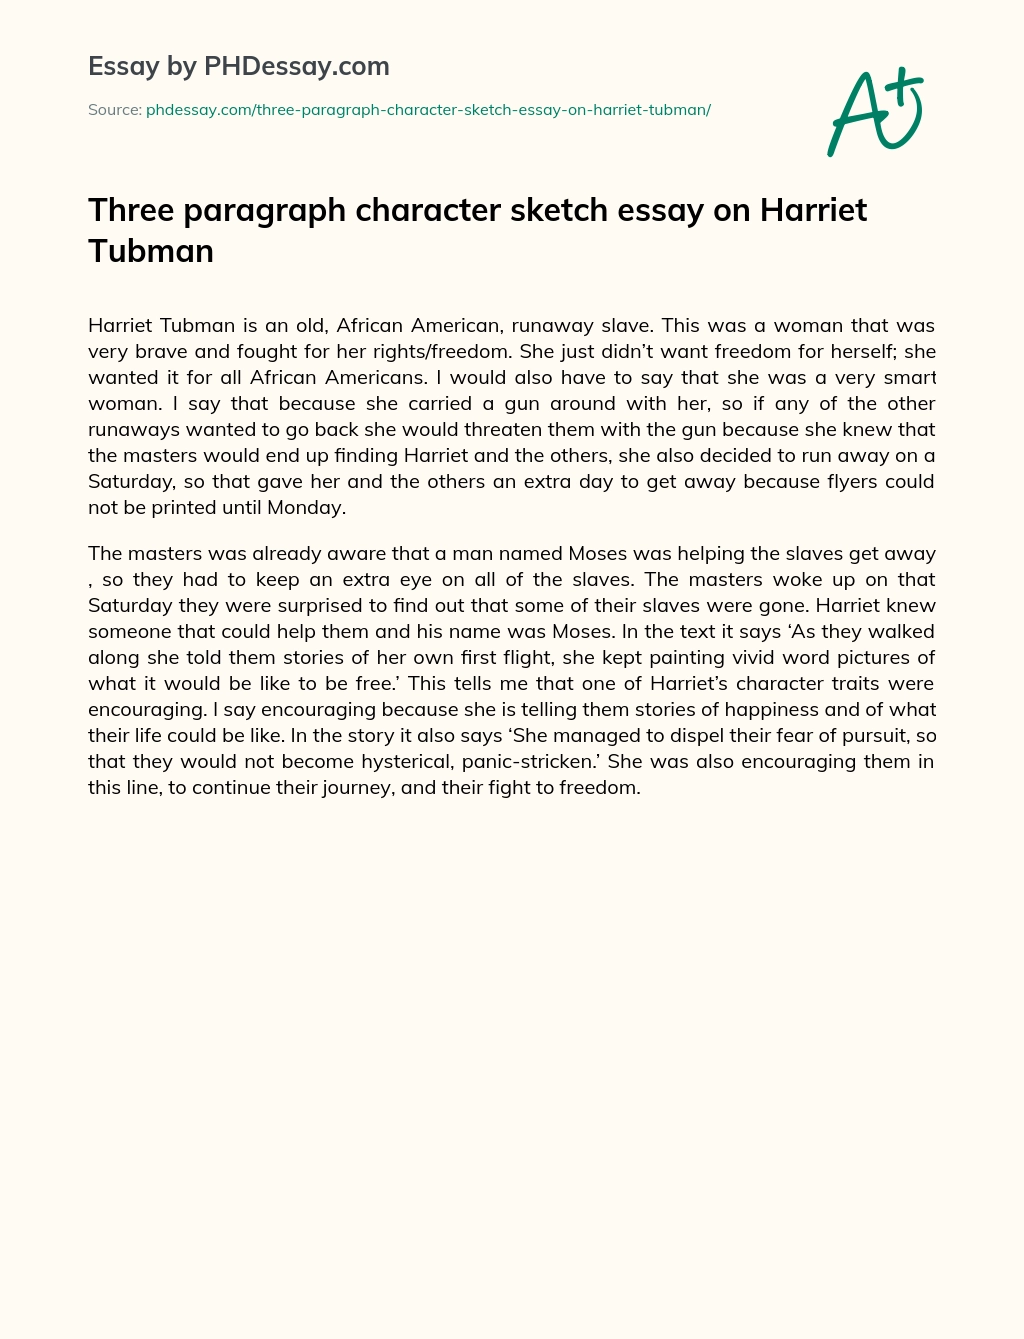 Three paragraph character sketch essay on Harriet Tubman essay